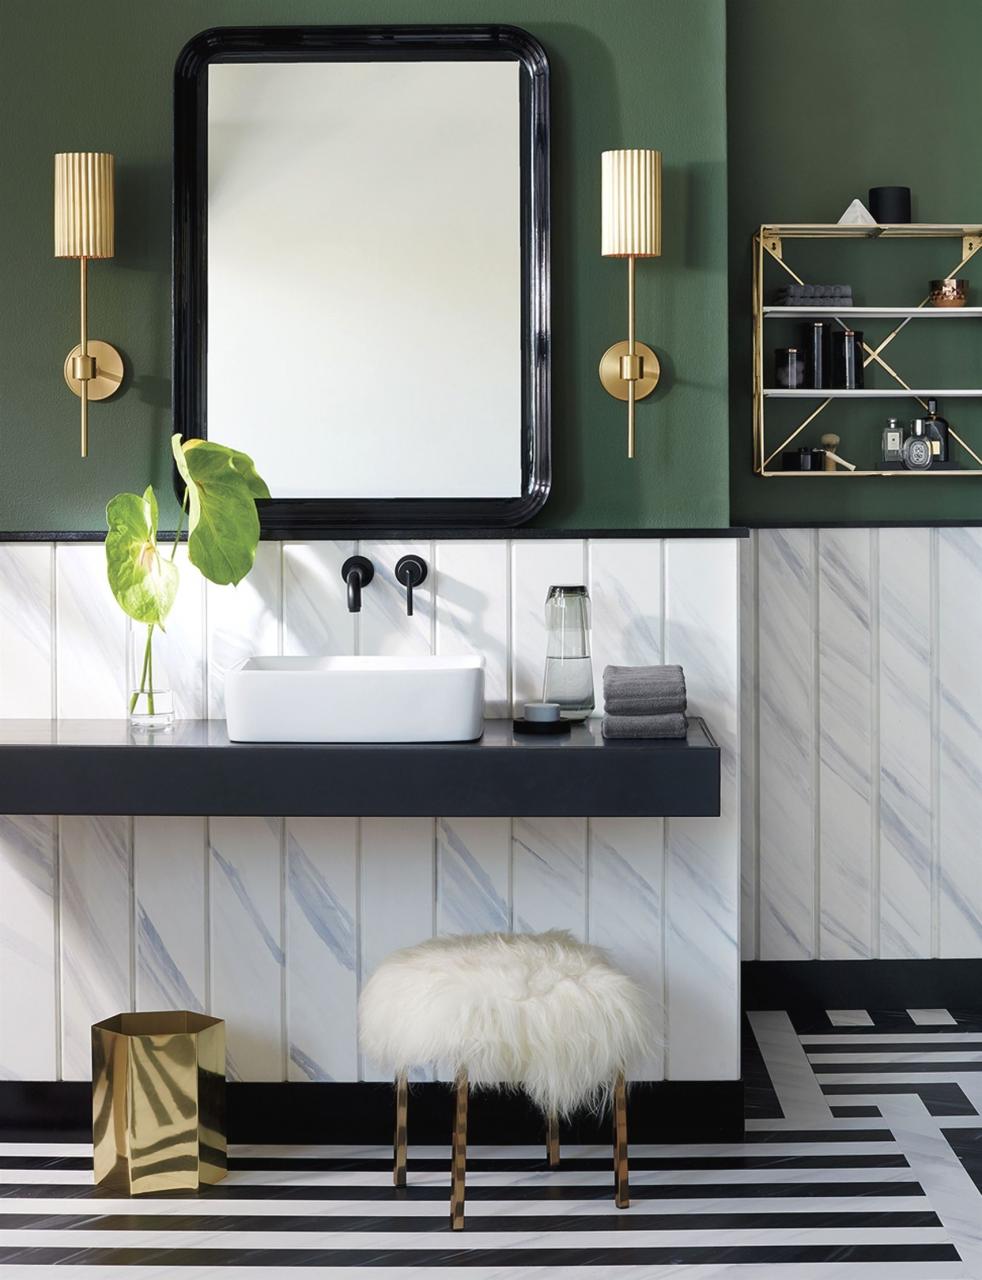 Modern bathroom. Forest green wall color is speaking to me 